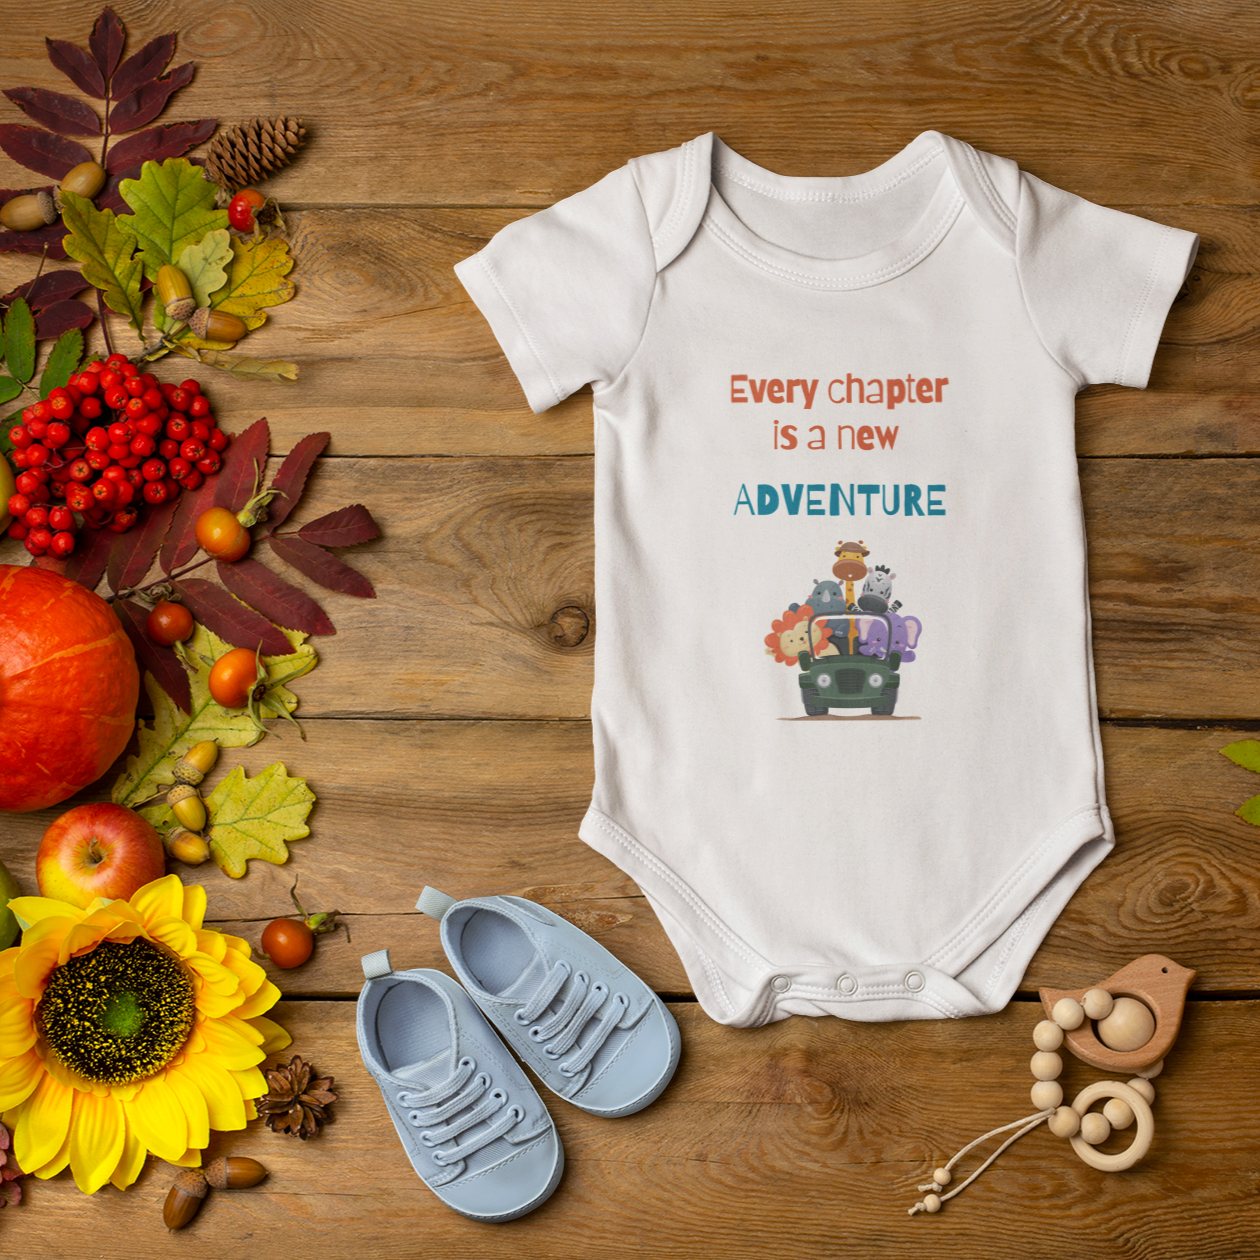 Story of Awakening Lifestyle Community Spirituality Relationships Love Light Meditation Oneness Earth Balance Healing Shop Store Charity Tree Nature Read Write Crystals Jewelry Baby Clothing Quote Bodysuit Onesie